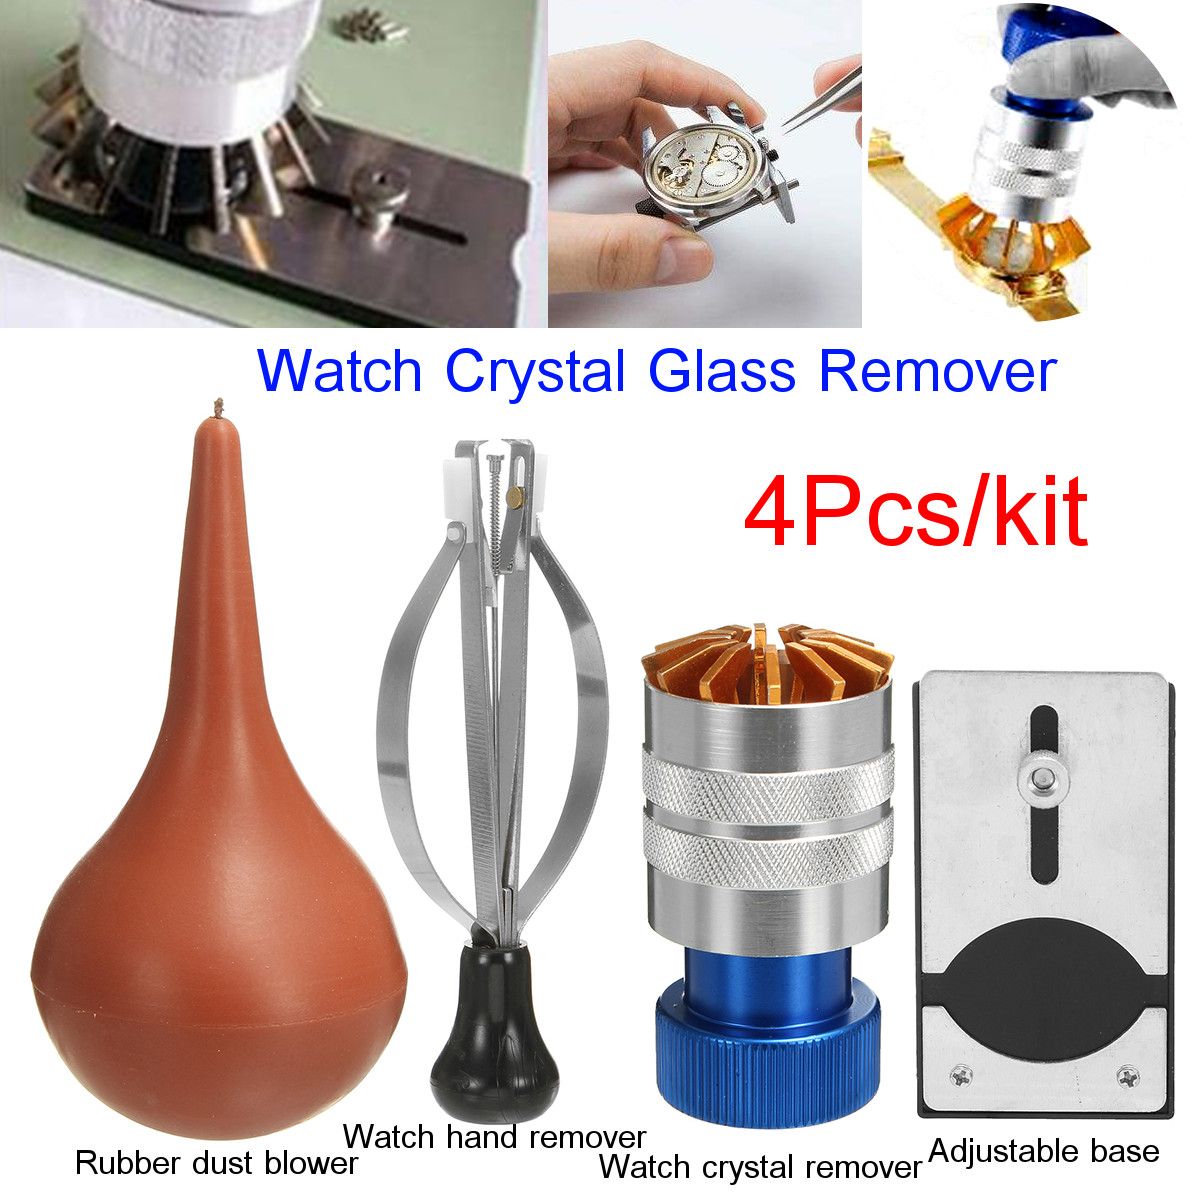 Watch-Crystal-Lift-Crystal-Glass-Remover-Inserter-Fitting-Tool-Hand-Remover-1262936